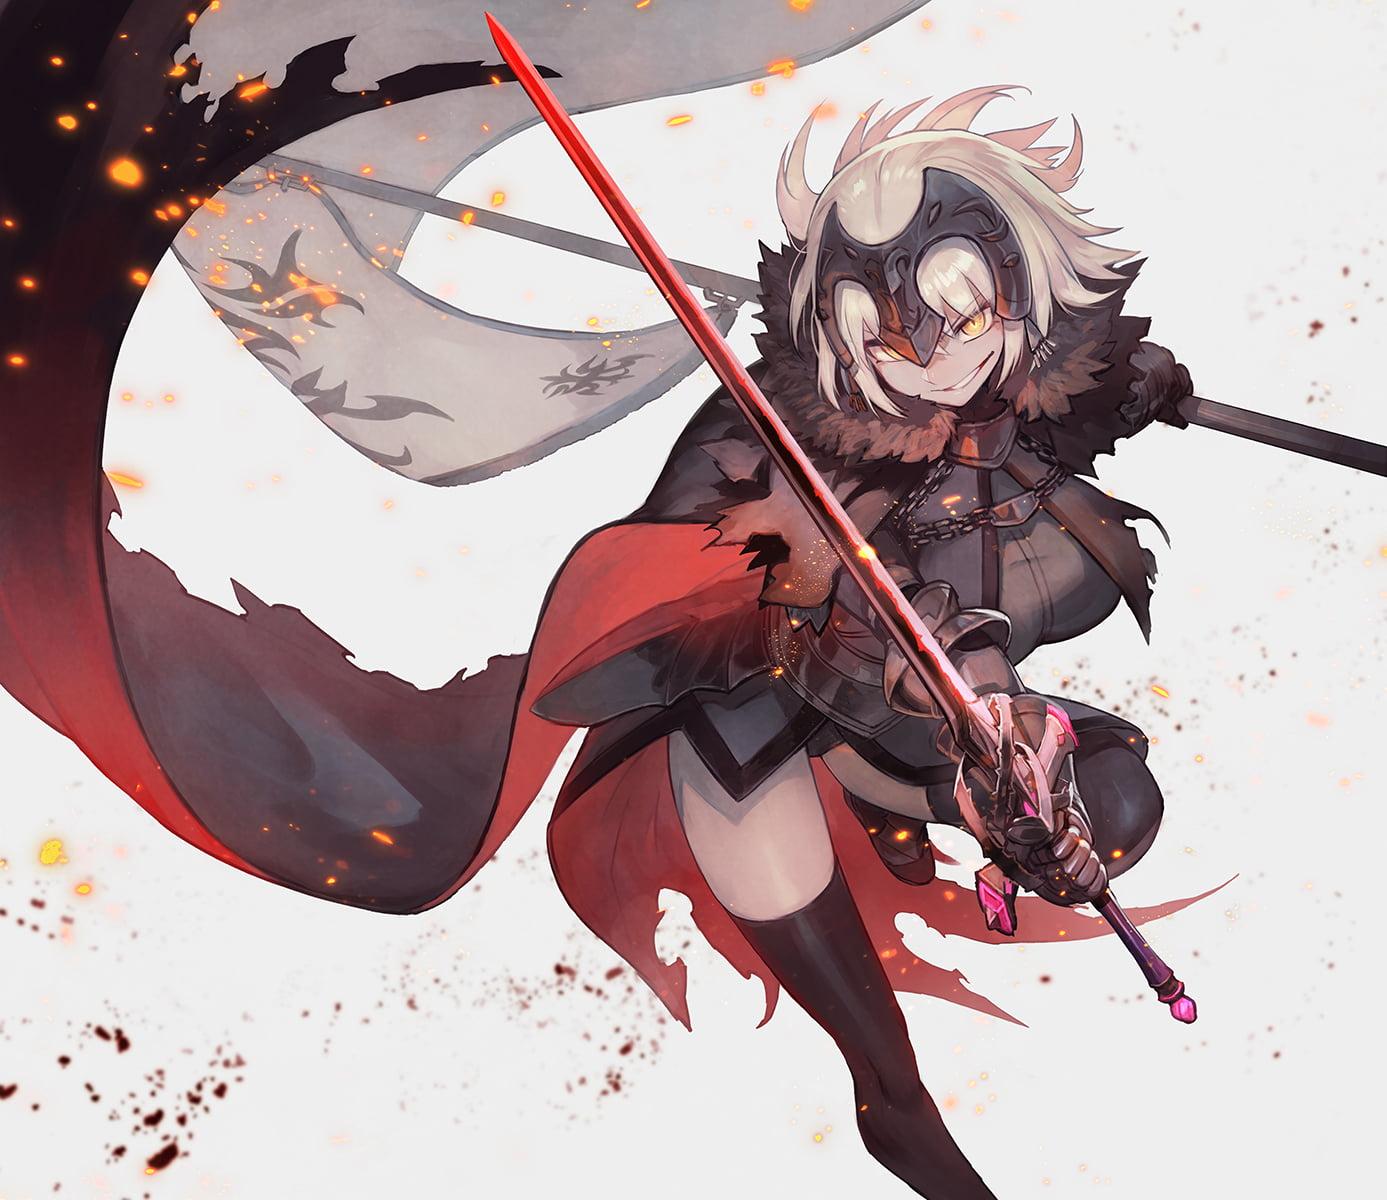 Man Holding Sword Animated Painting, Fate Grand Order, Jeanne D'arc